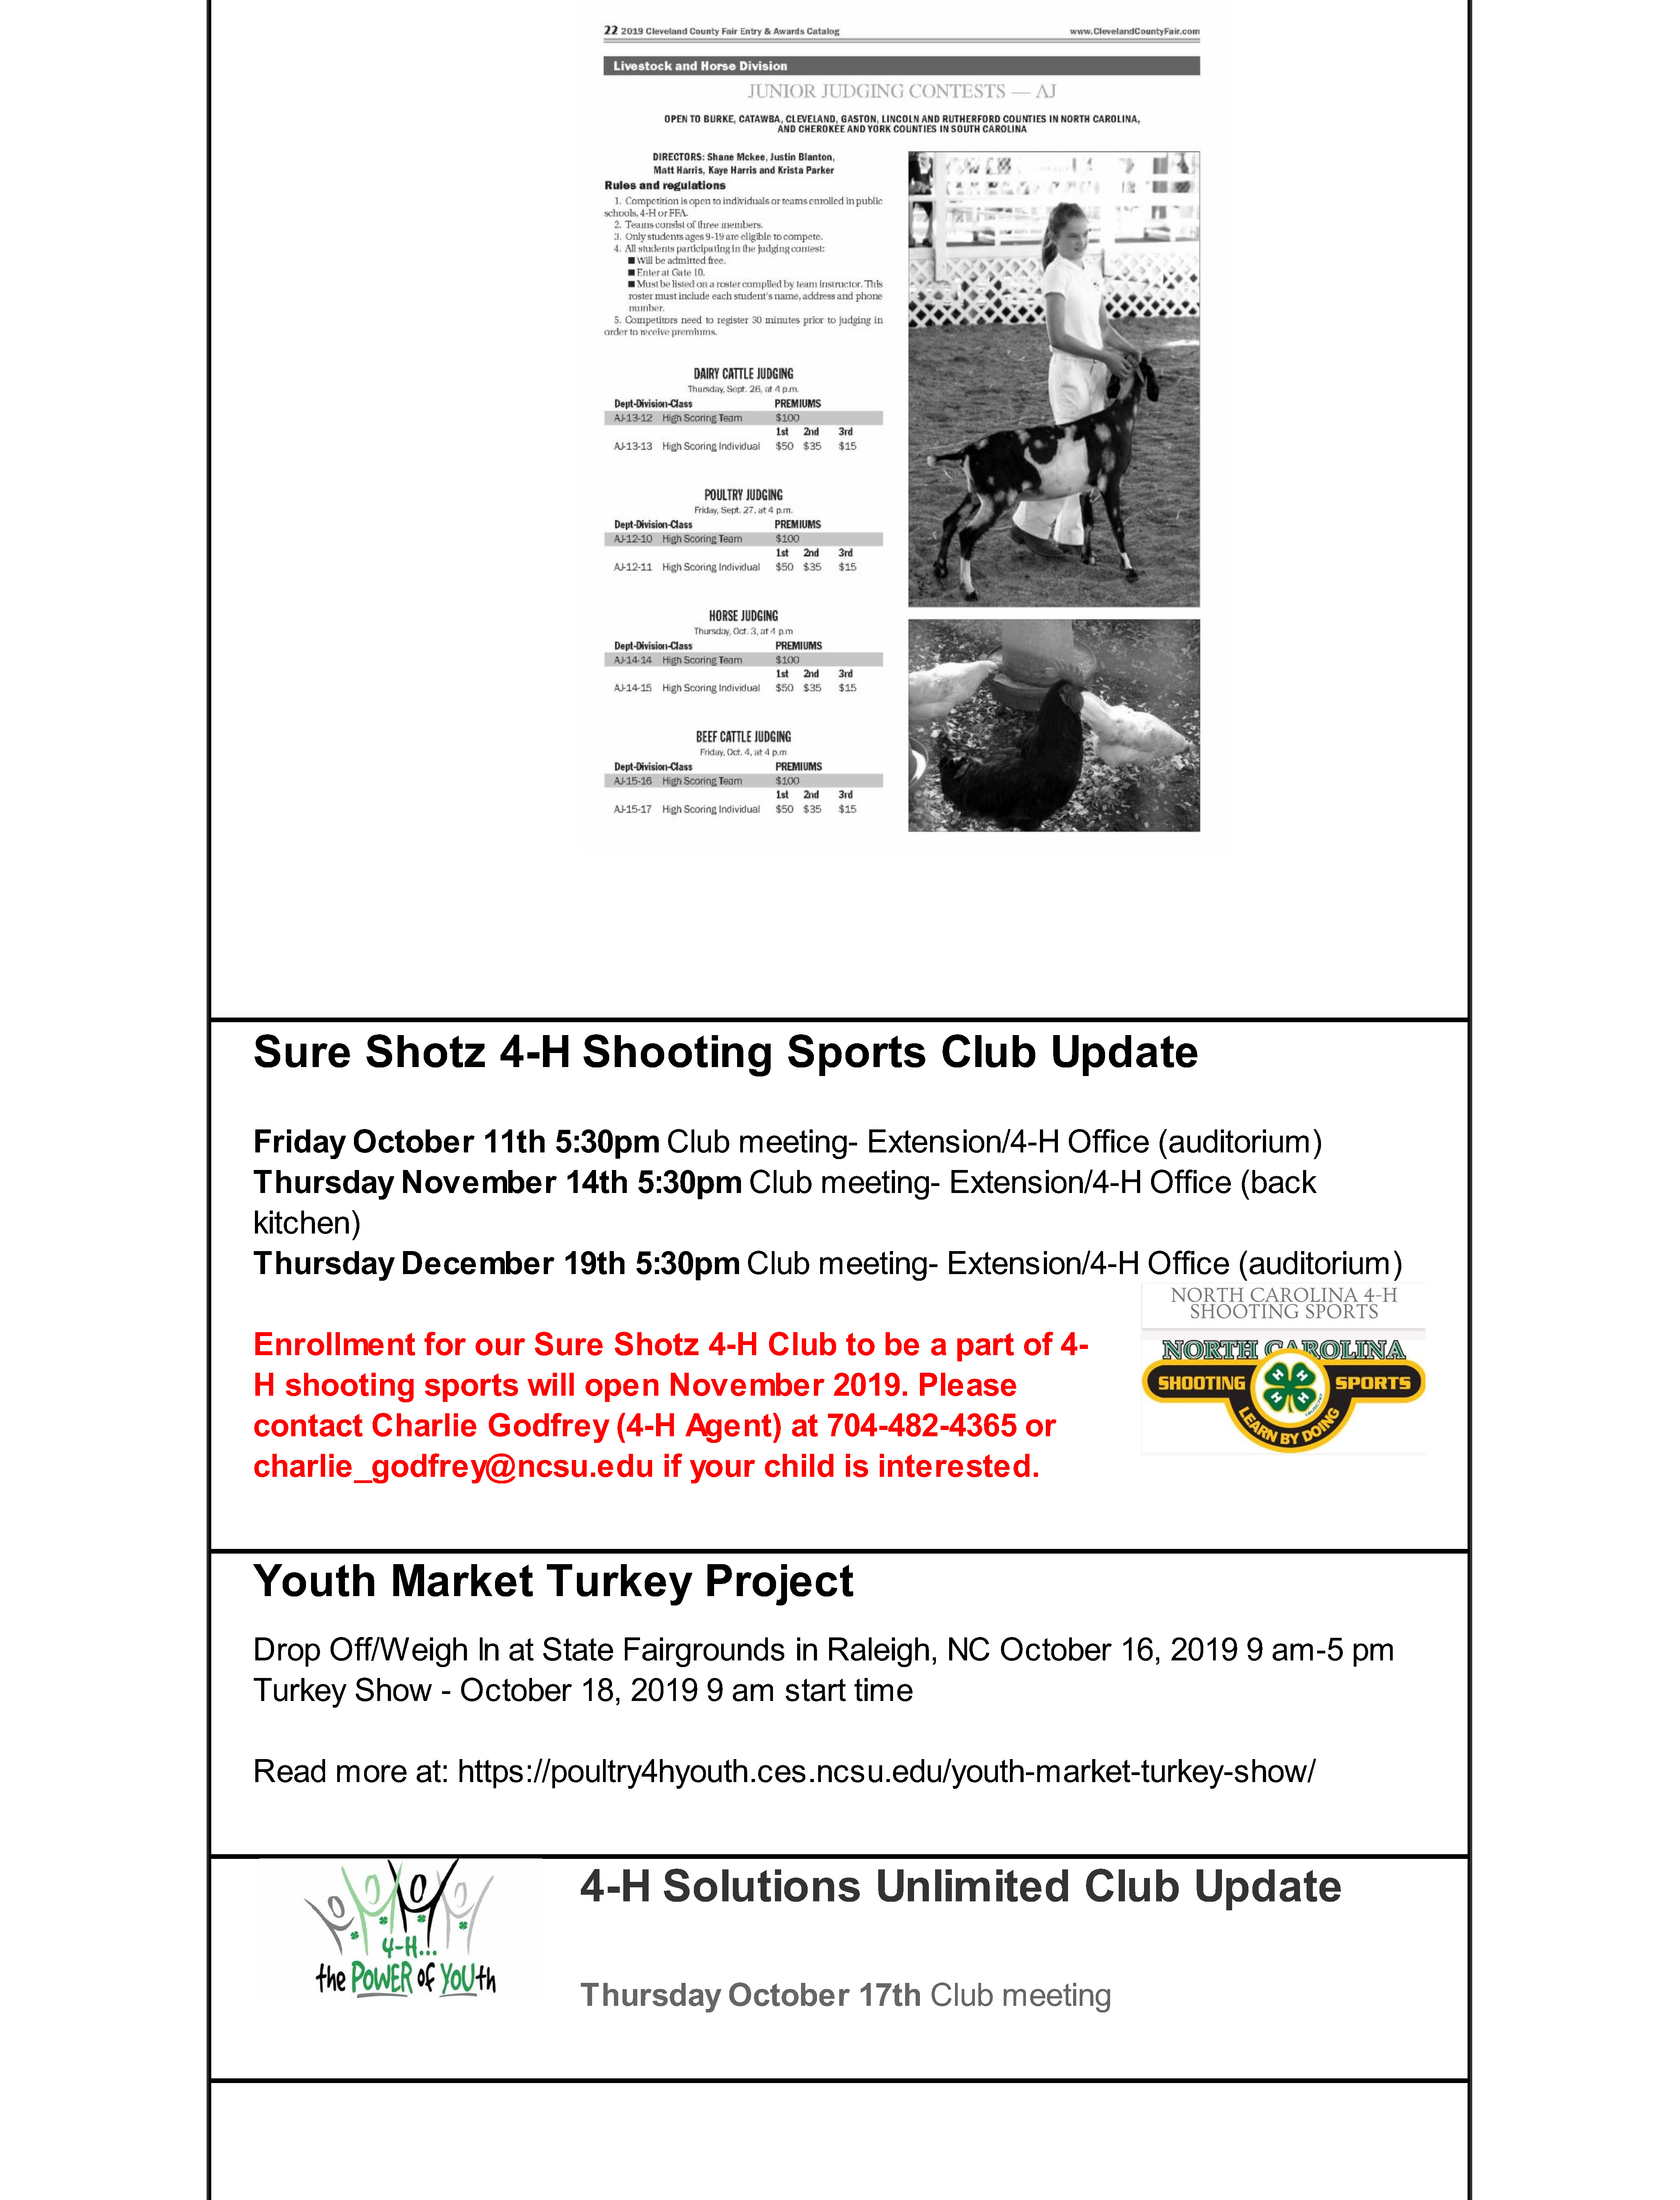 Cleveland County 4-H Newsletter page 3